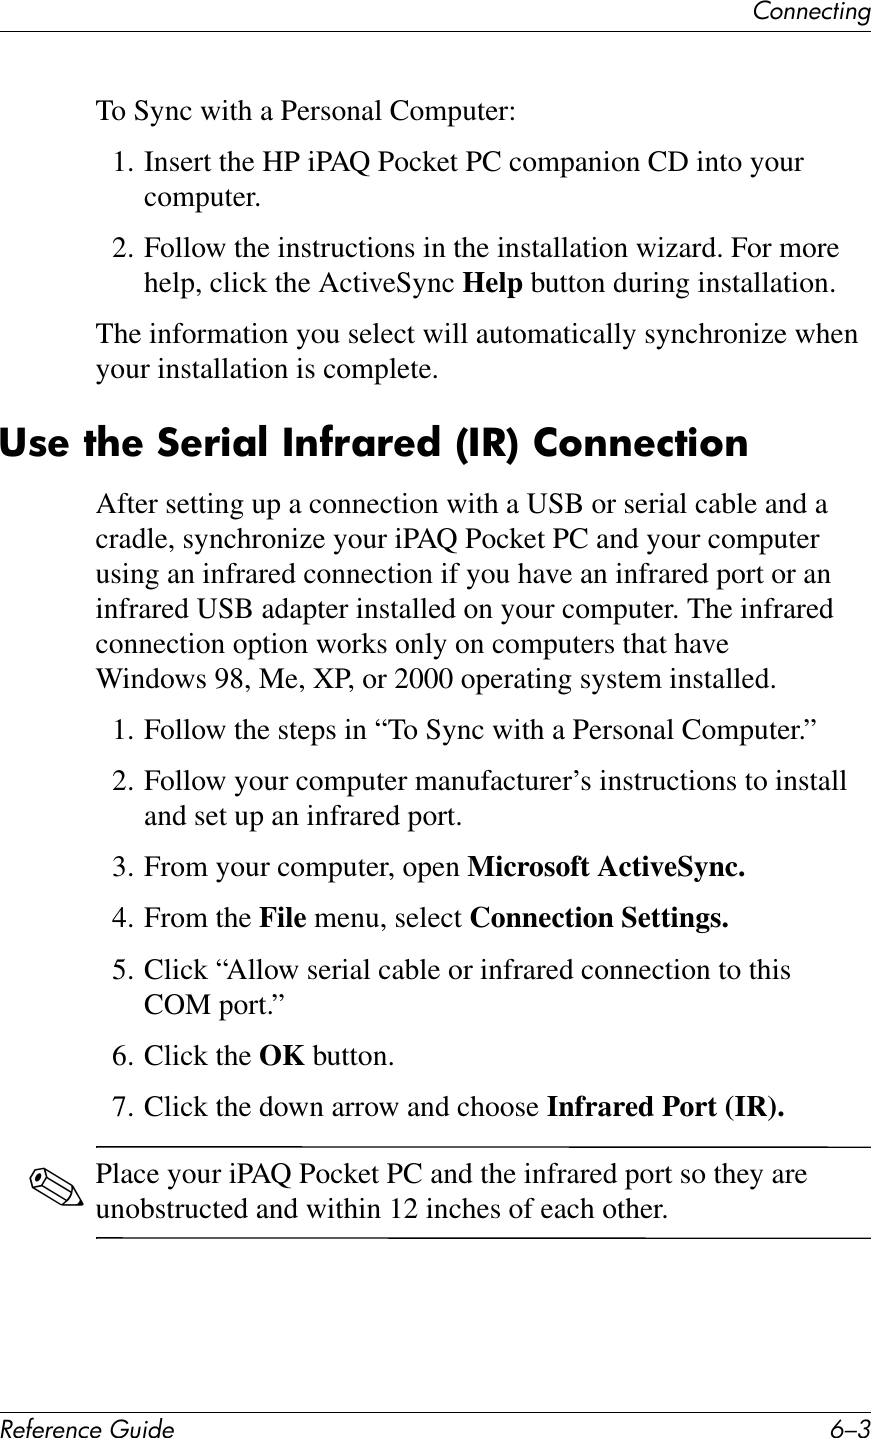 67%%&quot;&amp;1*%2!&quot;#&quot;$&quot;%&amp;&quot;&apos;()*+&quot; E/9To Sync with a Personal Computer:1. Insert the HP iPAQ Pocket PC companion CD into your computer.2. Follow the instructions in the installation wizard. For more help, click the ActiveSync Help button during installation.The information you select will automatically synchronize when your installation is complete.38&quot;&amp;7?&quot;&amp;:&quot;!);@&amp;/$#!;!&quot;*&amp;\/-]&amp;26$$&quot;%7)6$After setting up a connection with a USB or serial cable and a cradle, synchronize your iPAQ Pocket PC and your computer using an infrared connection if you have an infrared port or an infrared USB adapter installed on your computer. The infrared connection option works only on computers that have Windows 98, Me, XP, or 2000 operating system installed.1. Follow the steps in “To Sync with a Personal Computer.”2. Follow your computer manufacturer’s instructions to install and set up an infrared port.3. From your computer, open Microsoft ActiveSync.4. From the File menu, select Connection Settings.5. Click “Allow serial cable or infrared connection to this COM port.”6. Click the OK button.7. Click the down arrow and choose Infrared Port (IR).✎Place your iPAQ Pocket PC and the infrared port so they are unobstructed and within 12 inches of each other.